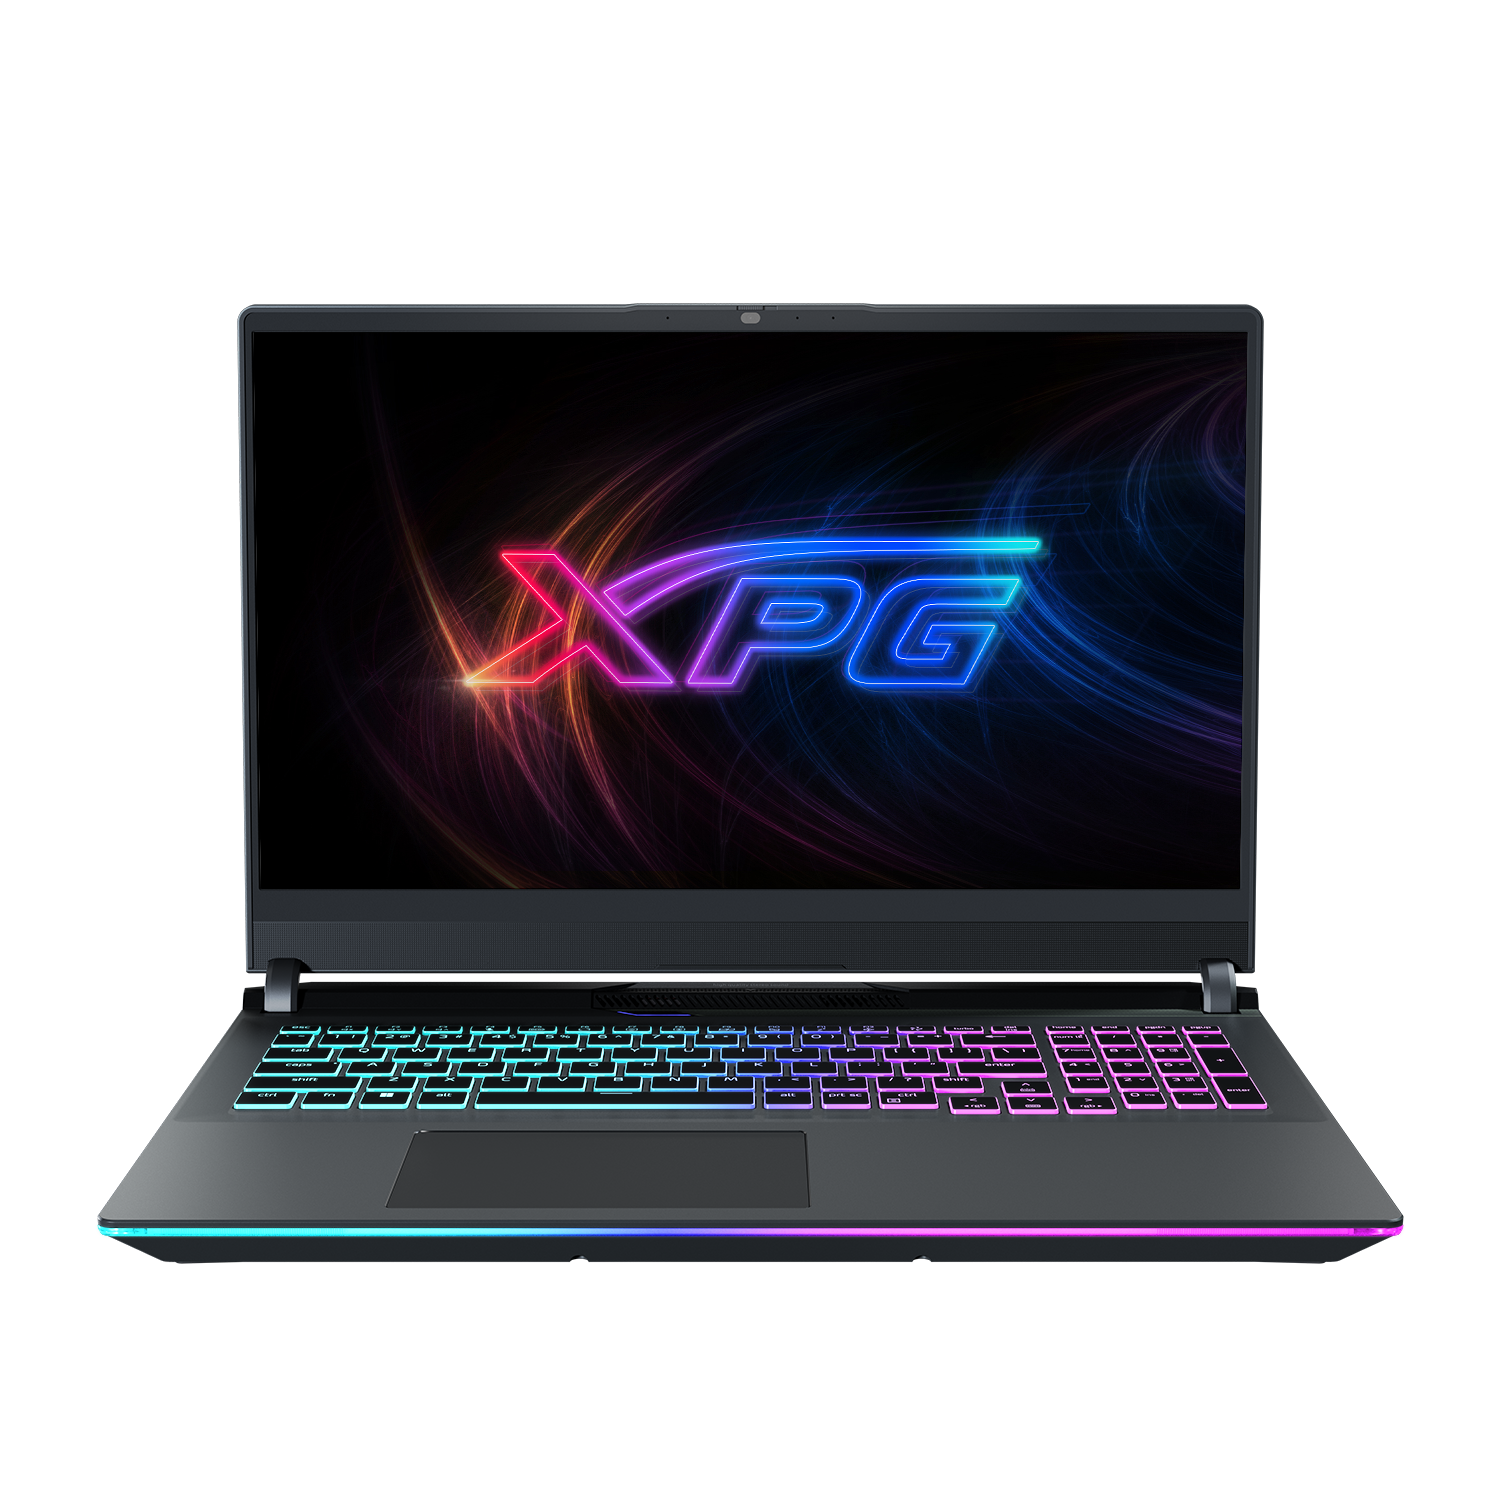 XENIA 16 RX GAMING NOTEBOOK